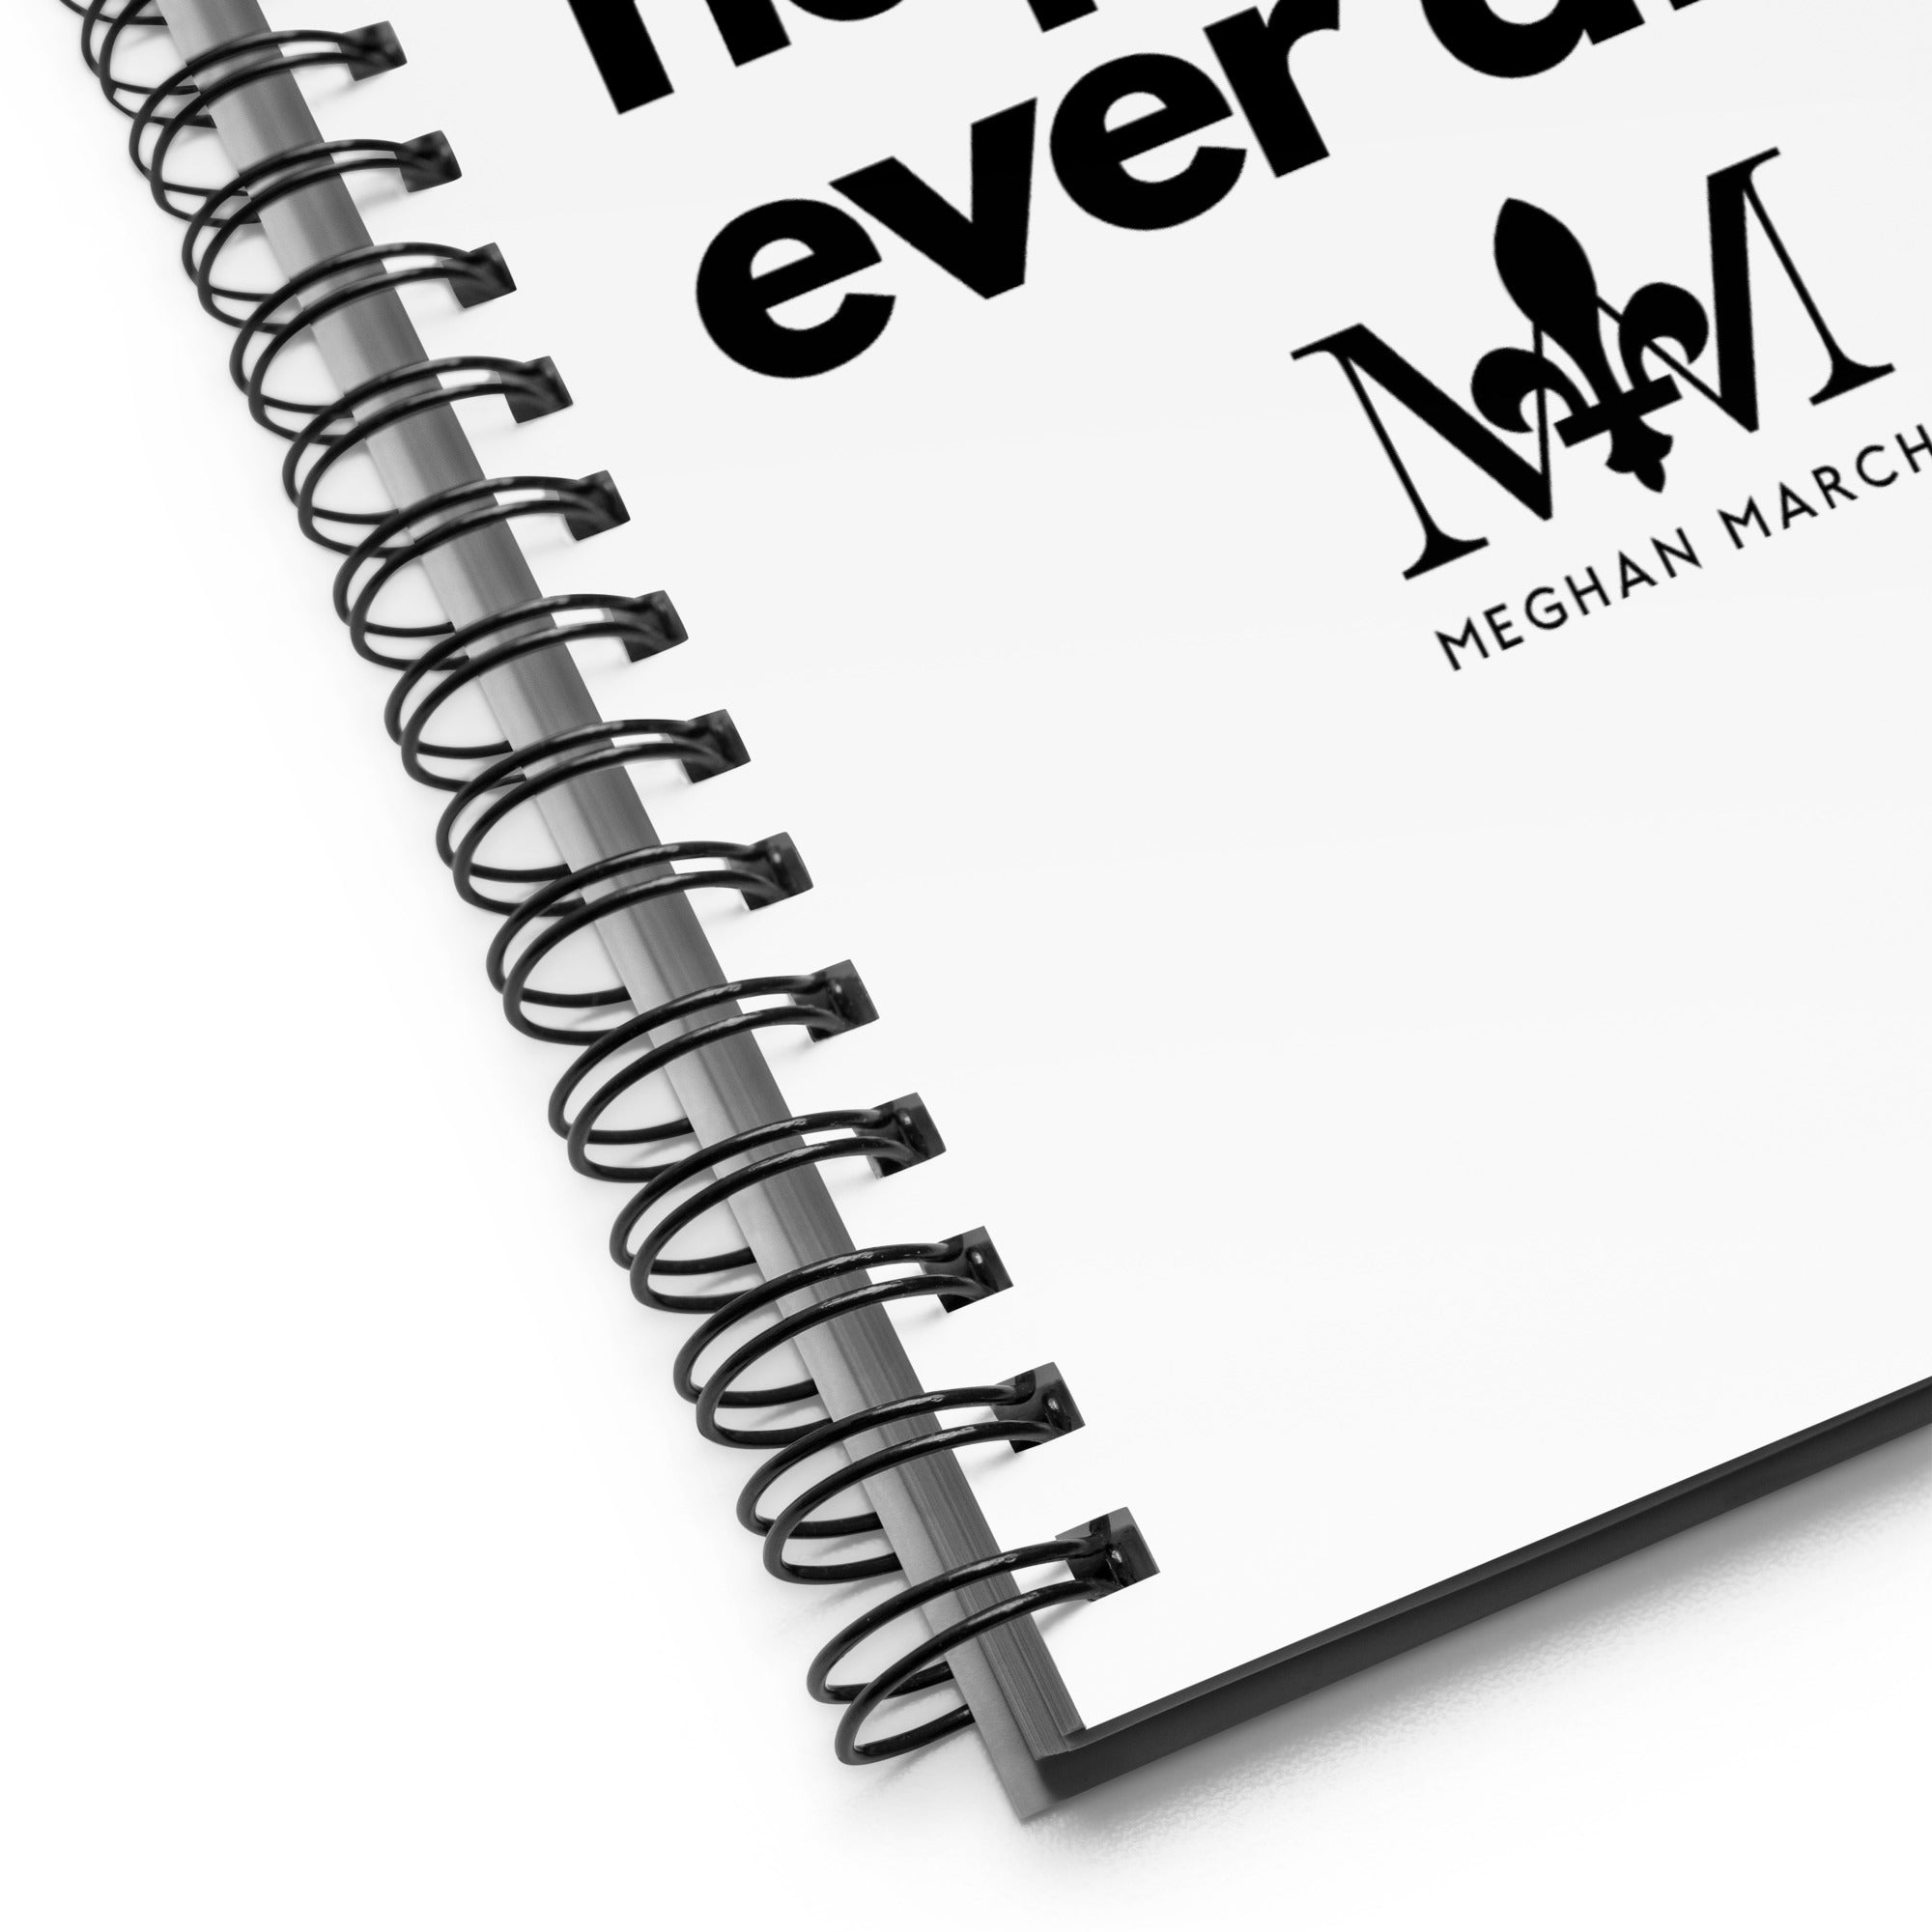 They Lived Happily Ever After Notebook